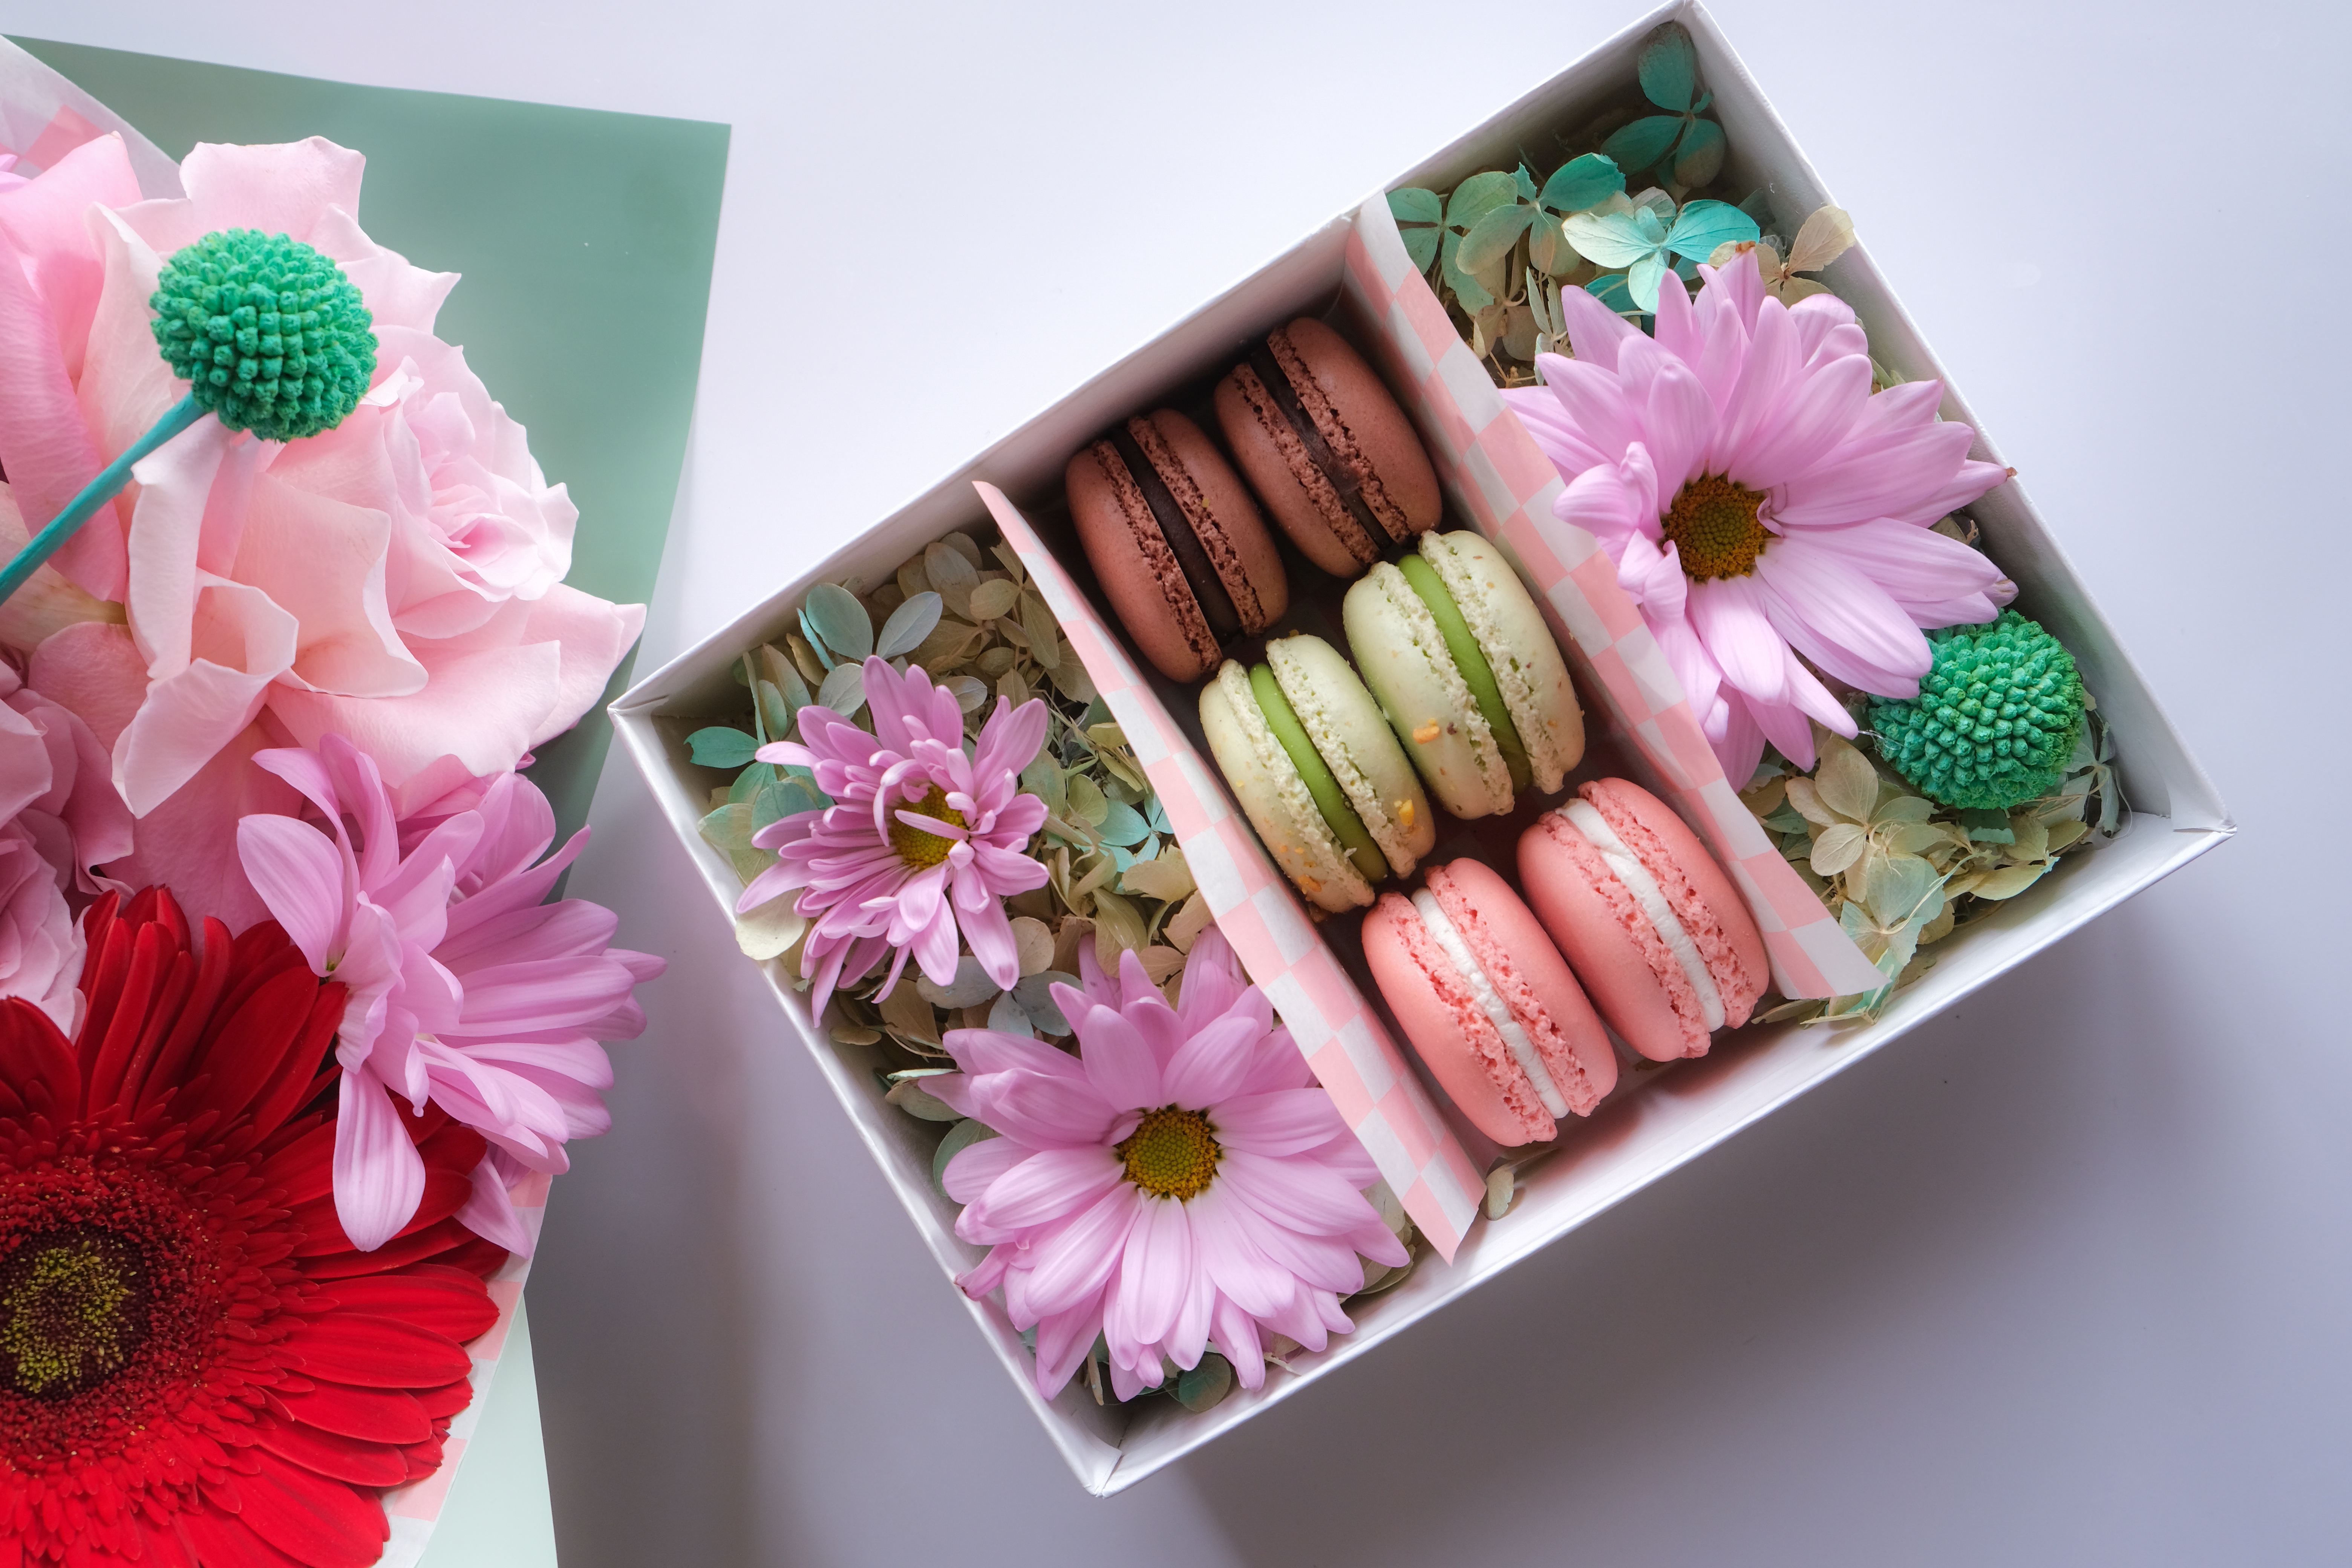 A box of flowers and macarons.